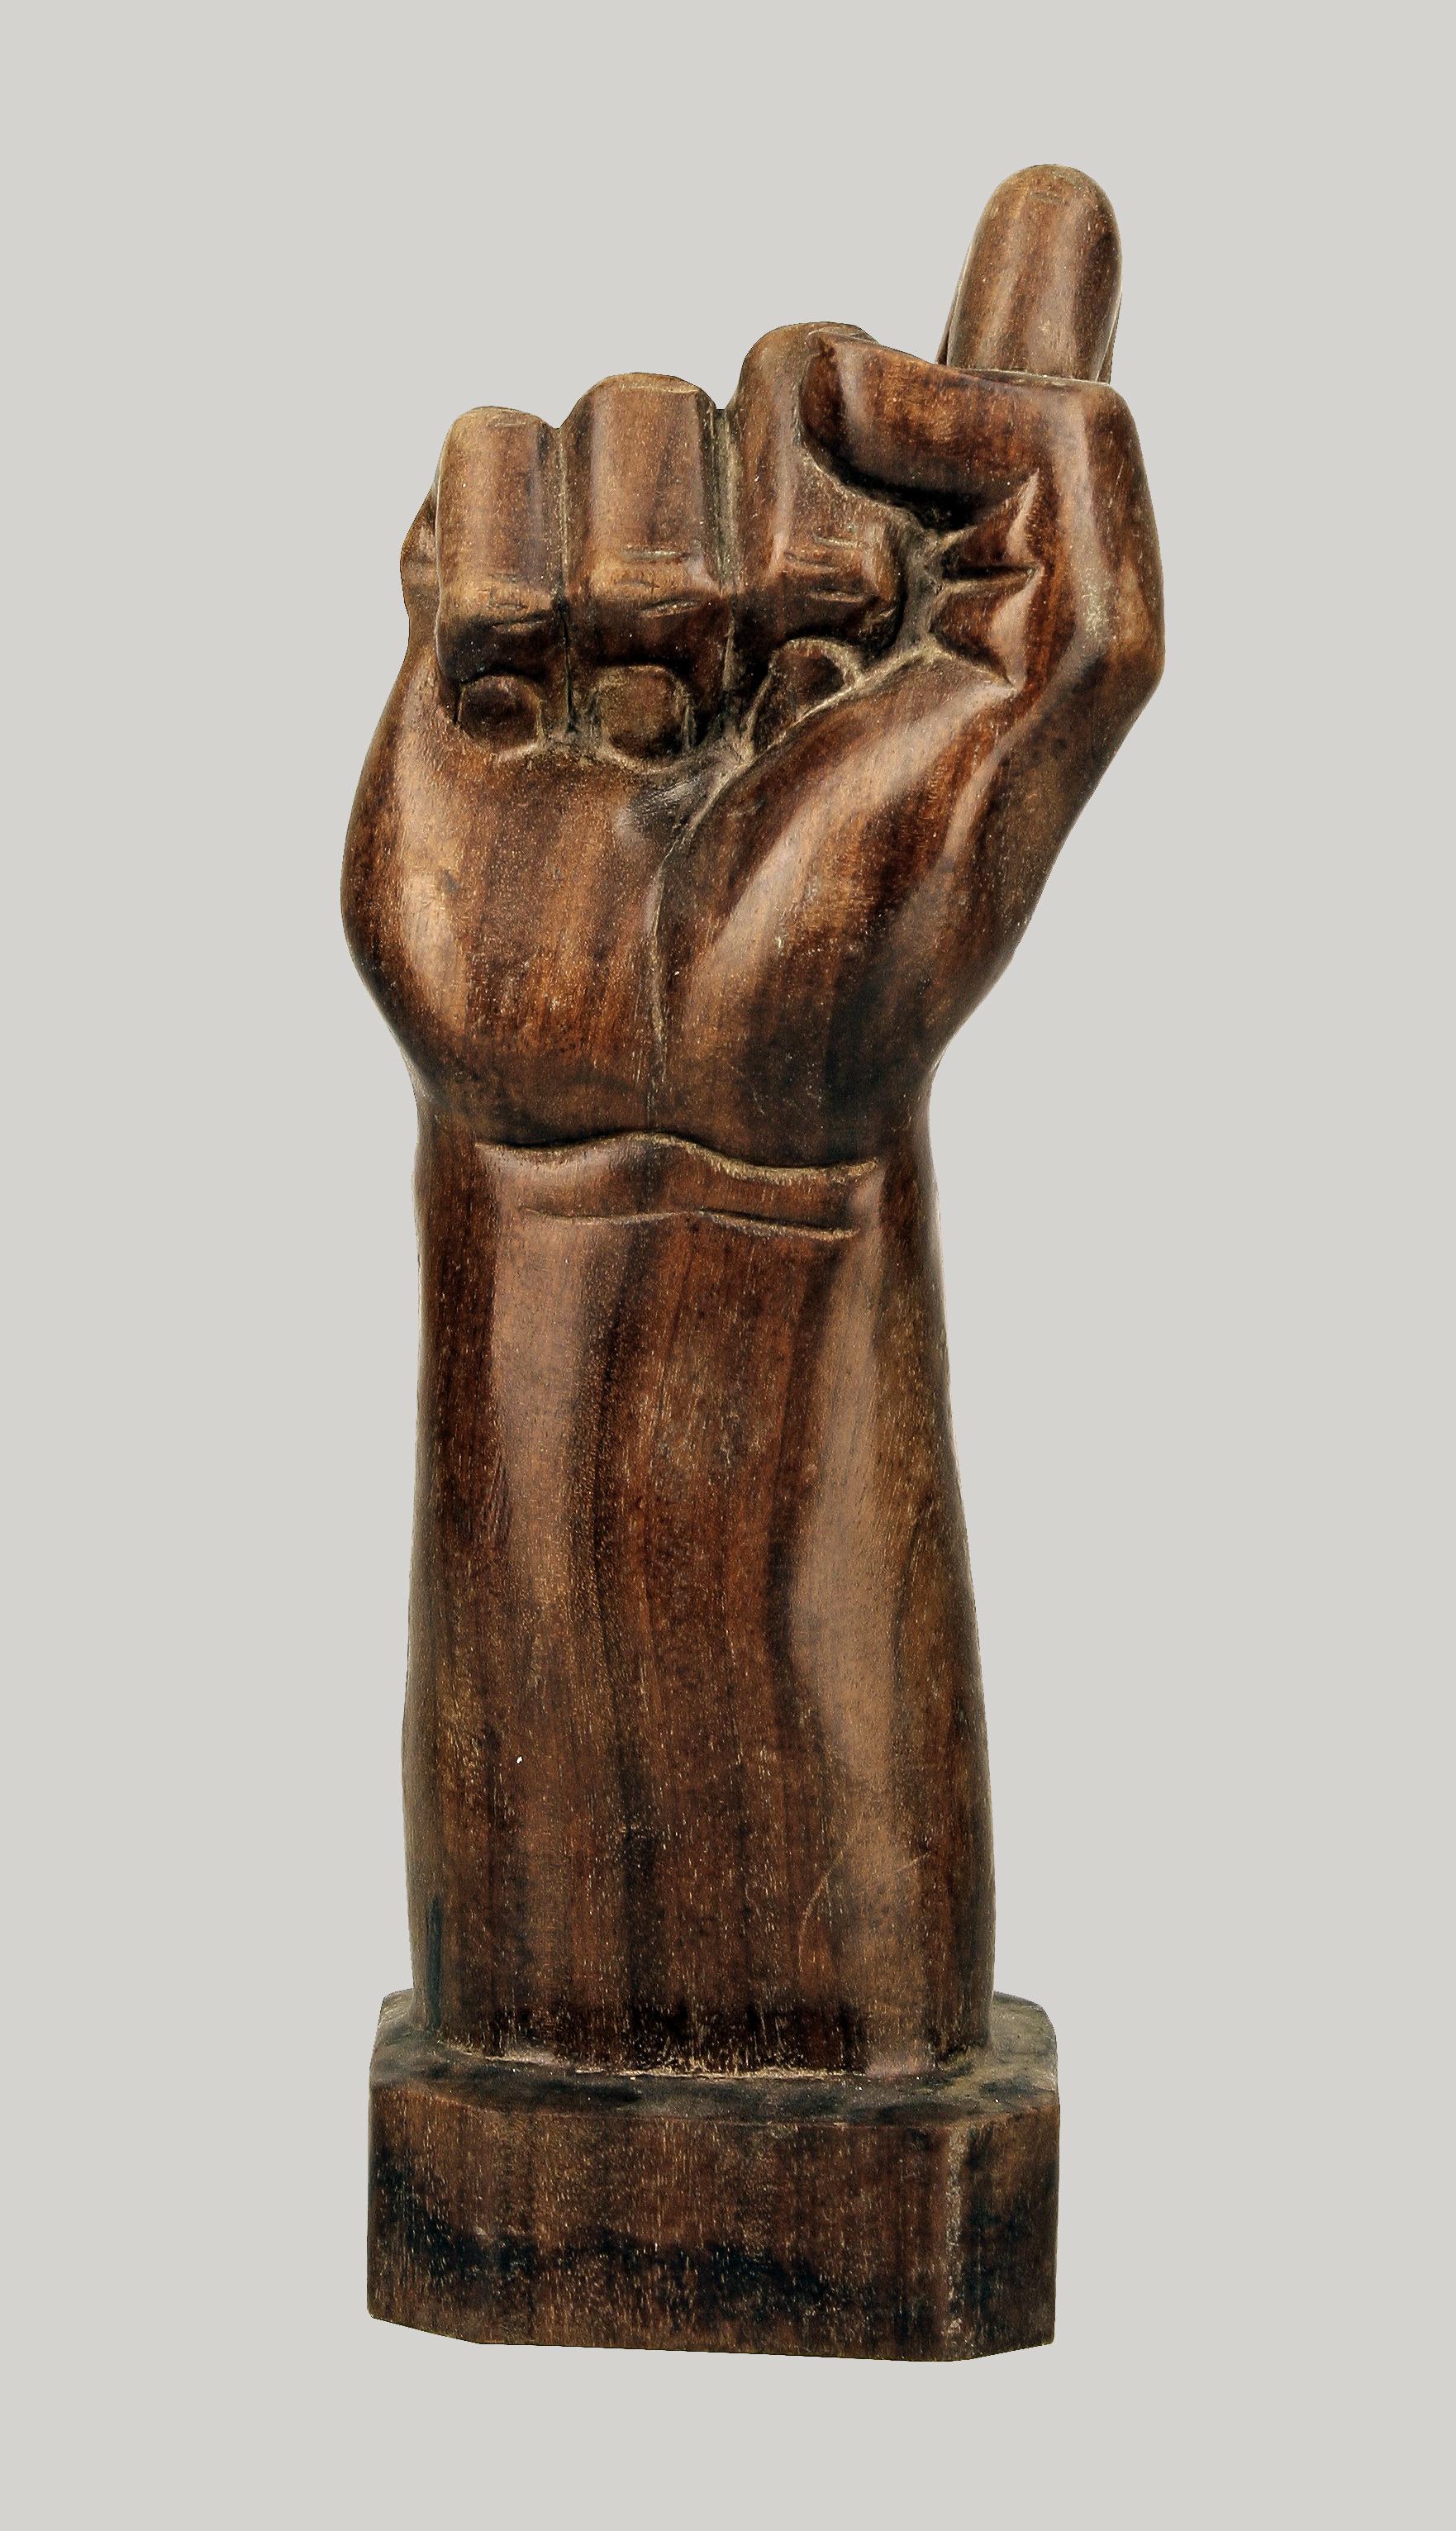 Late 20th century dominican hand-carved varnished wooden hand sculpture/cigar holder

By: unknown
Material: wood
Technique: carved, hand-carved, hand-crafted, varnished
Dimensions: 3.5 in x 3.5 in x 12 in
Date: late 20th century, circa 1990
Style: